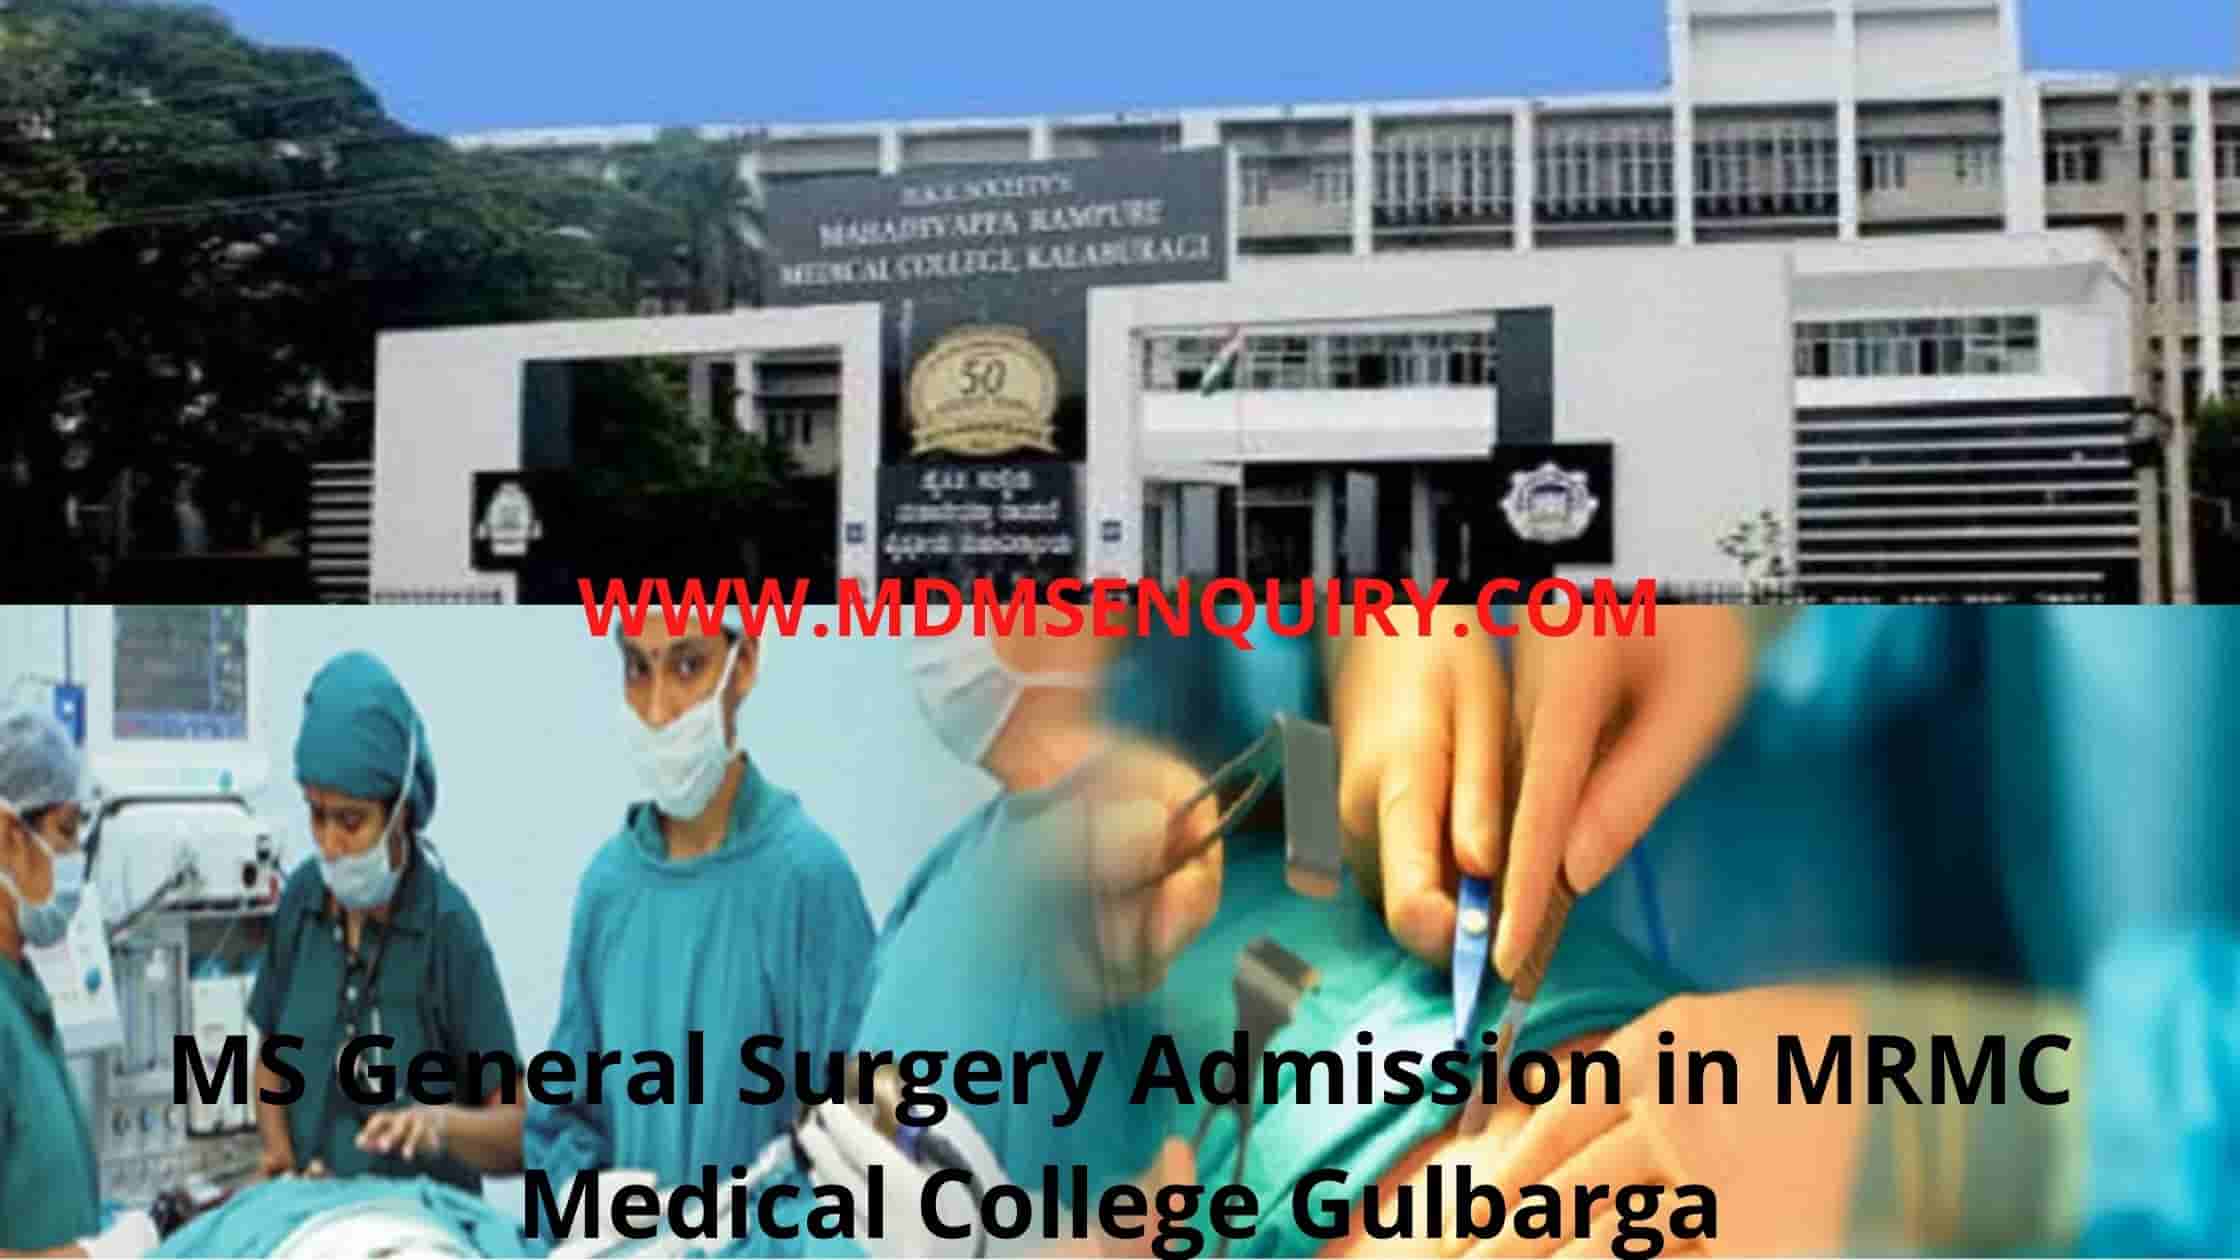 MS General Surgery Admission in MRMC Medical College Gulbarga